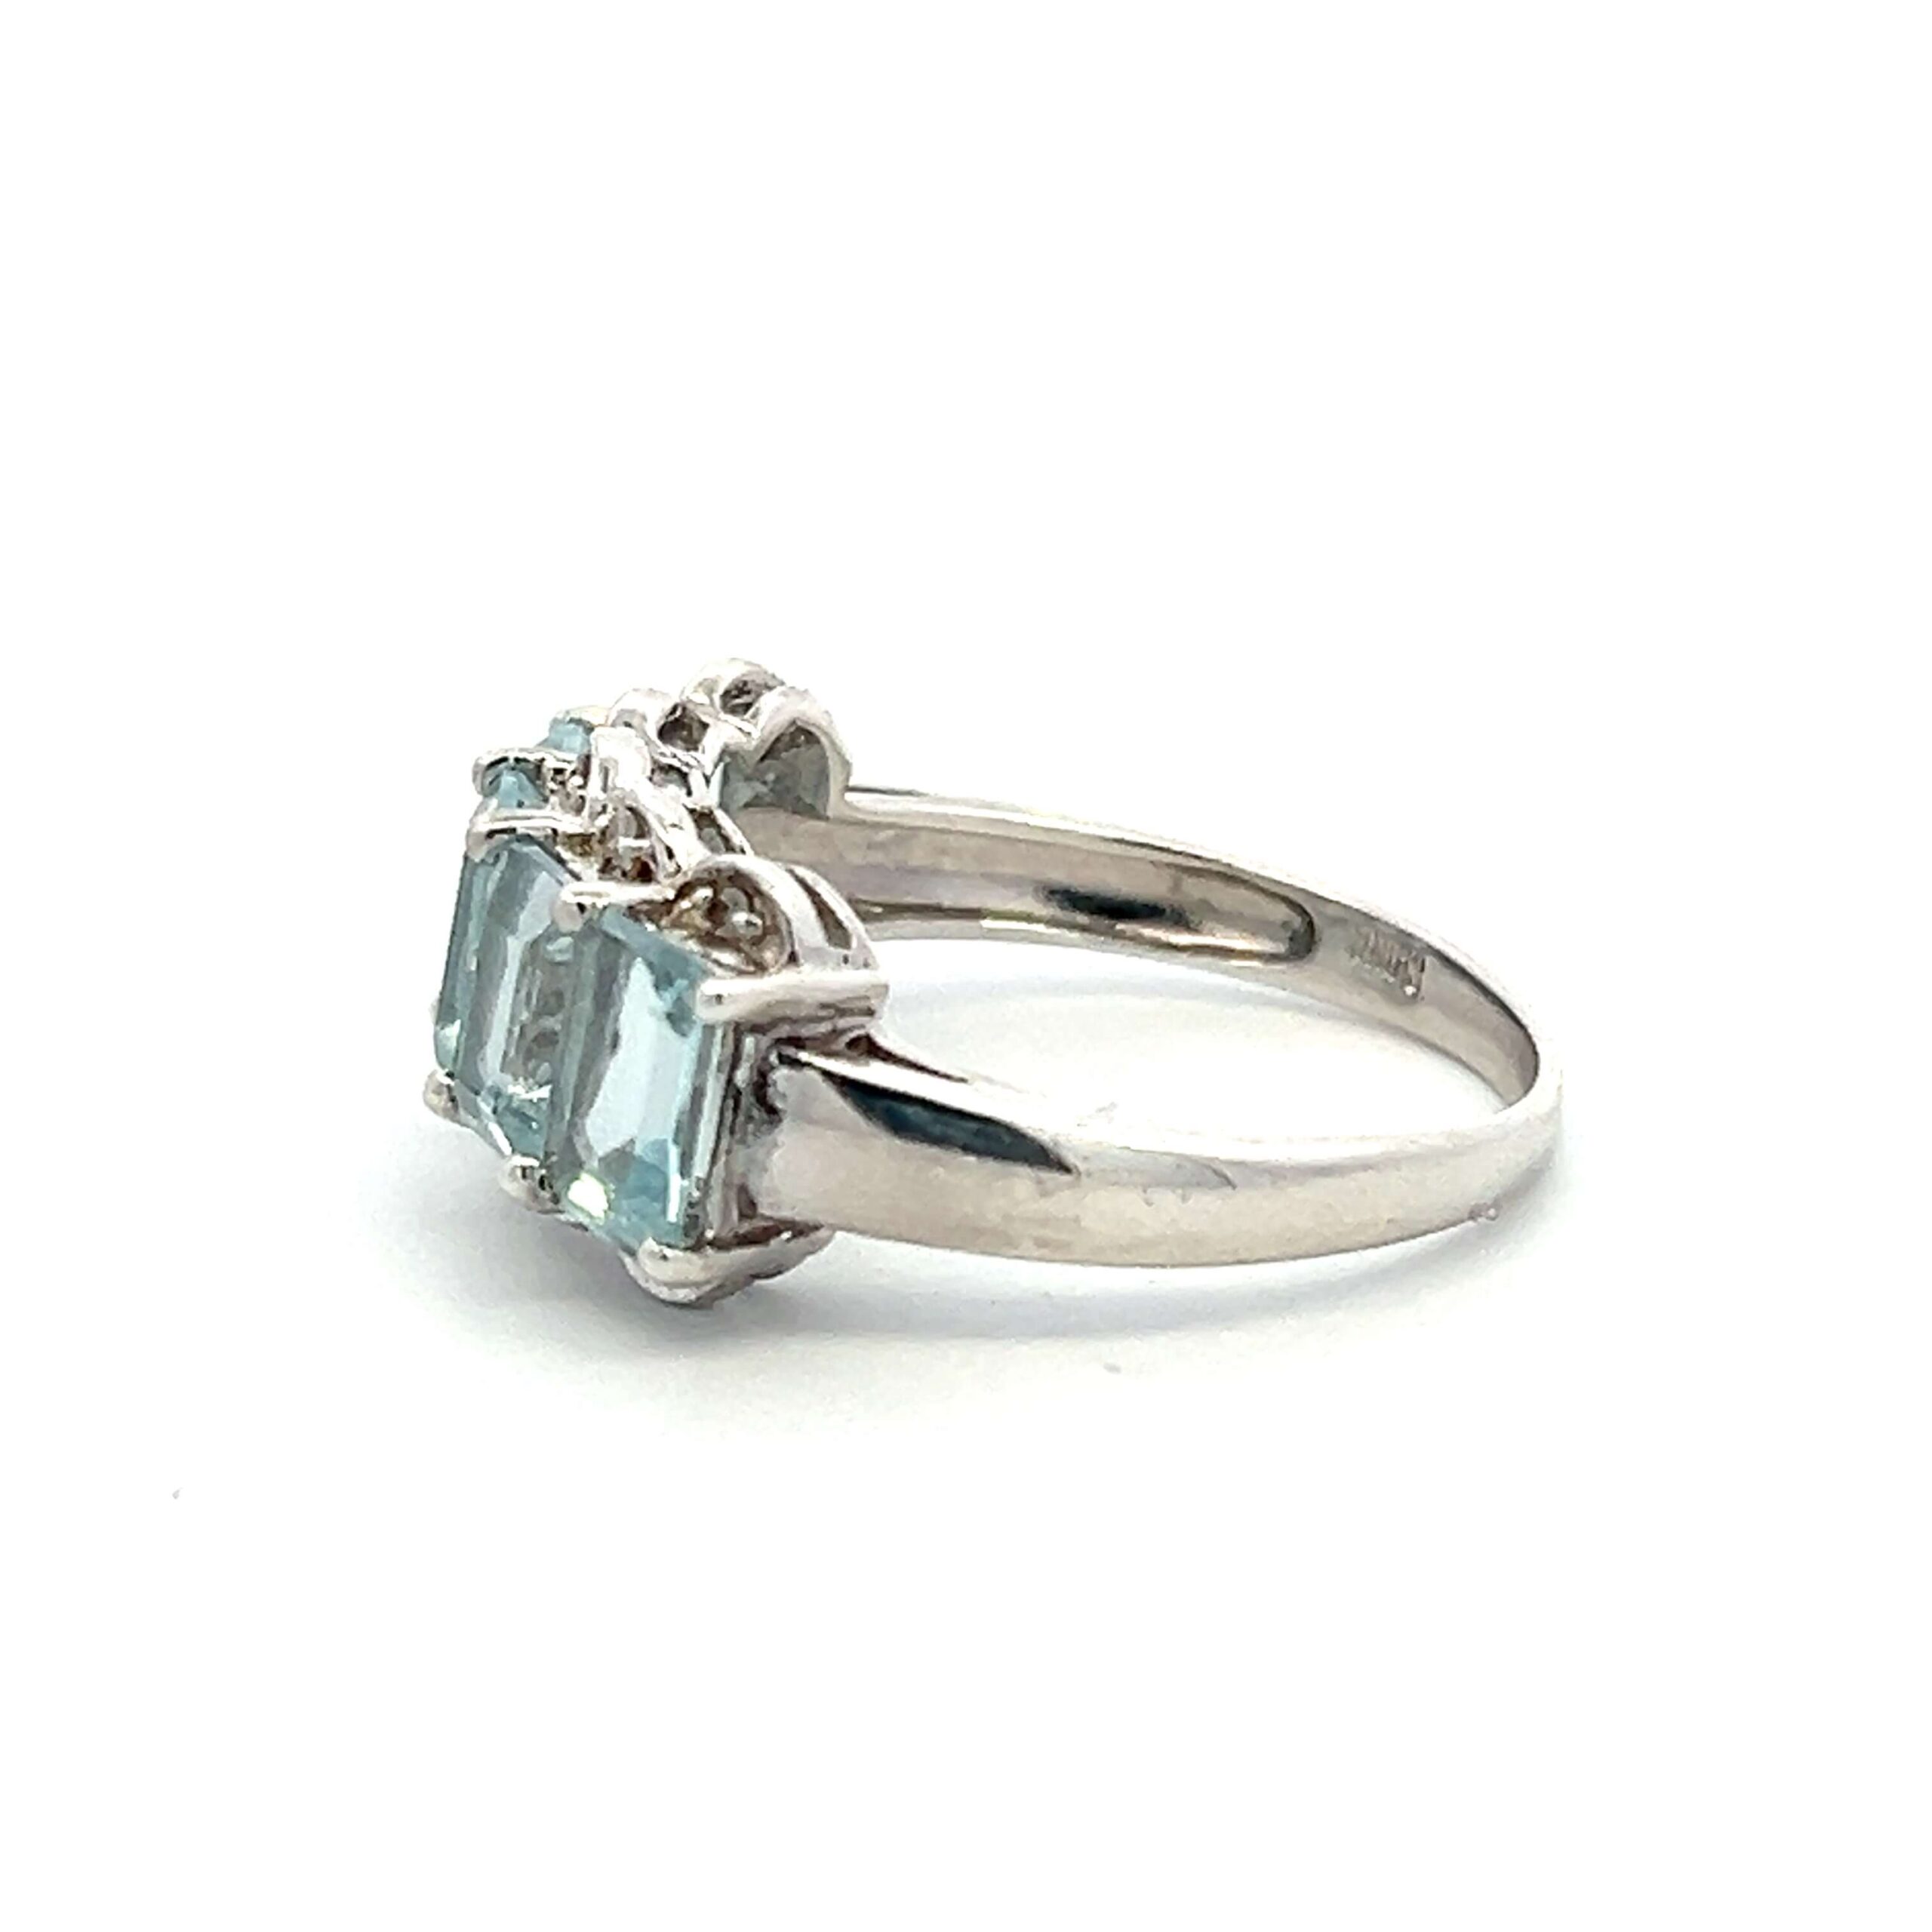 One estate sterling silver five-stone ring with 5 emerald-cut blue topazes and 10 round diamond accents